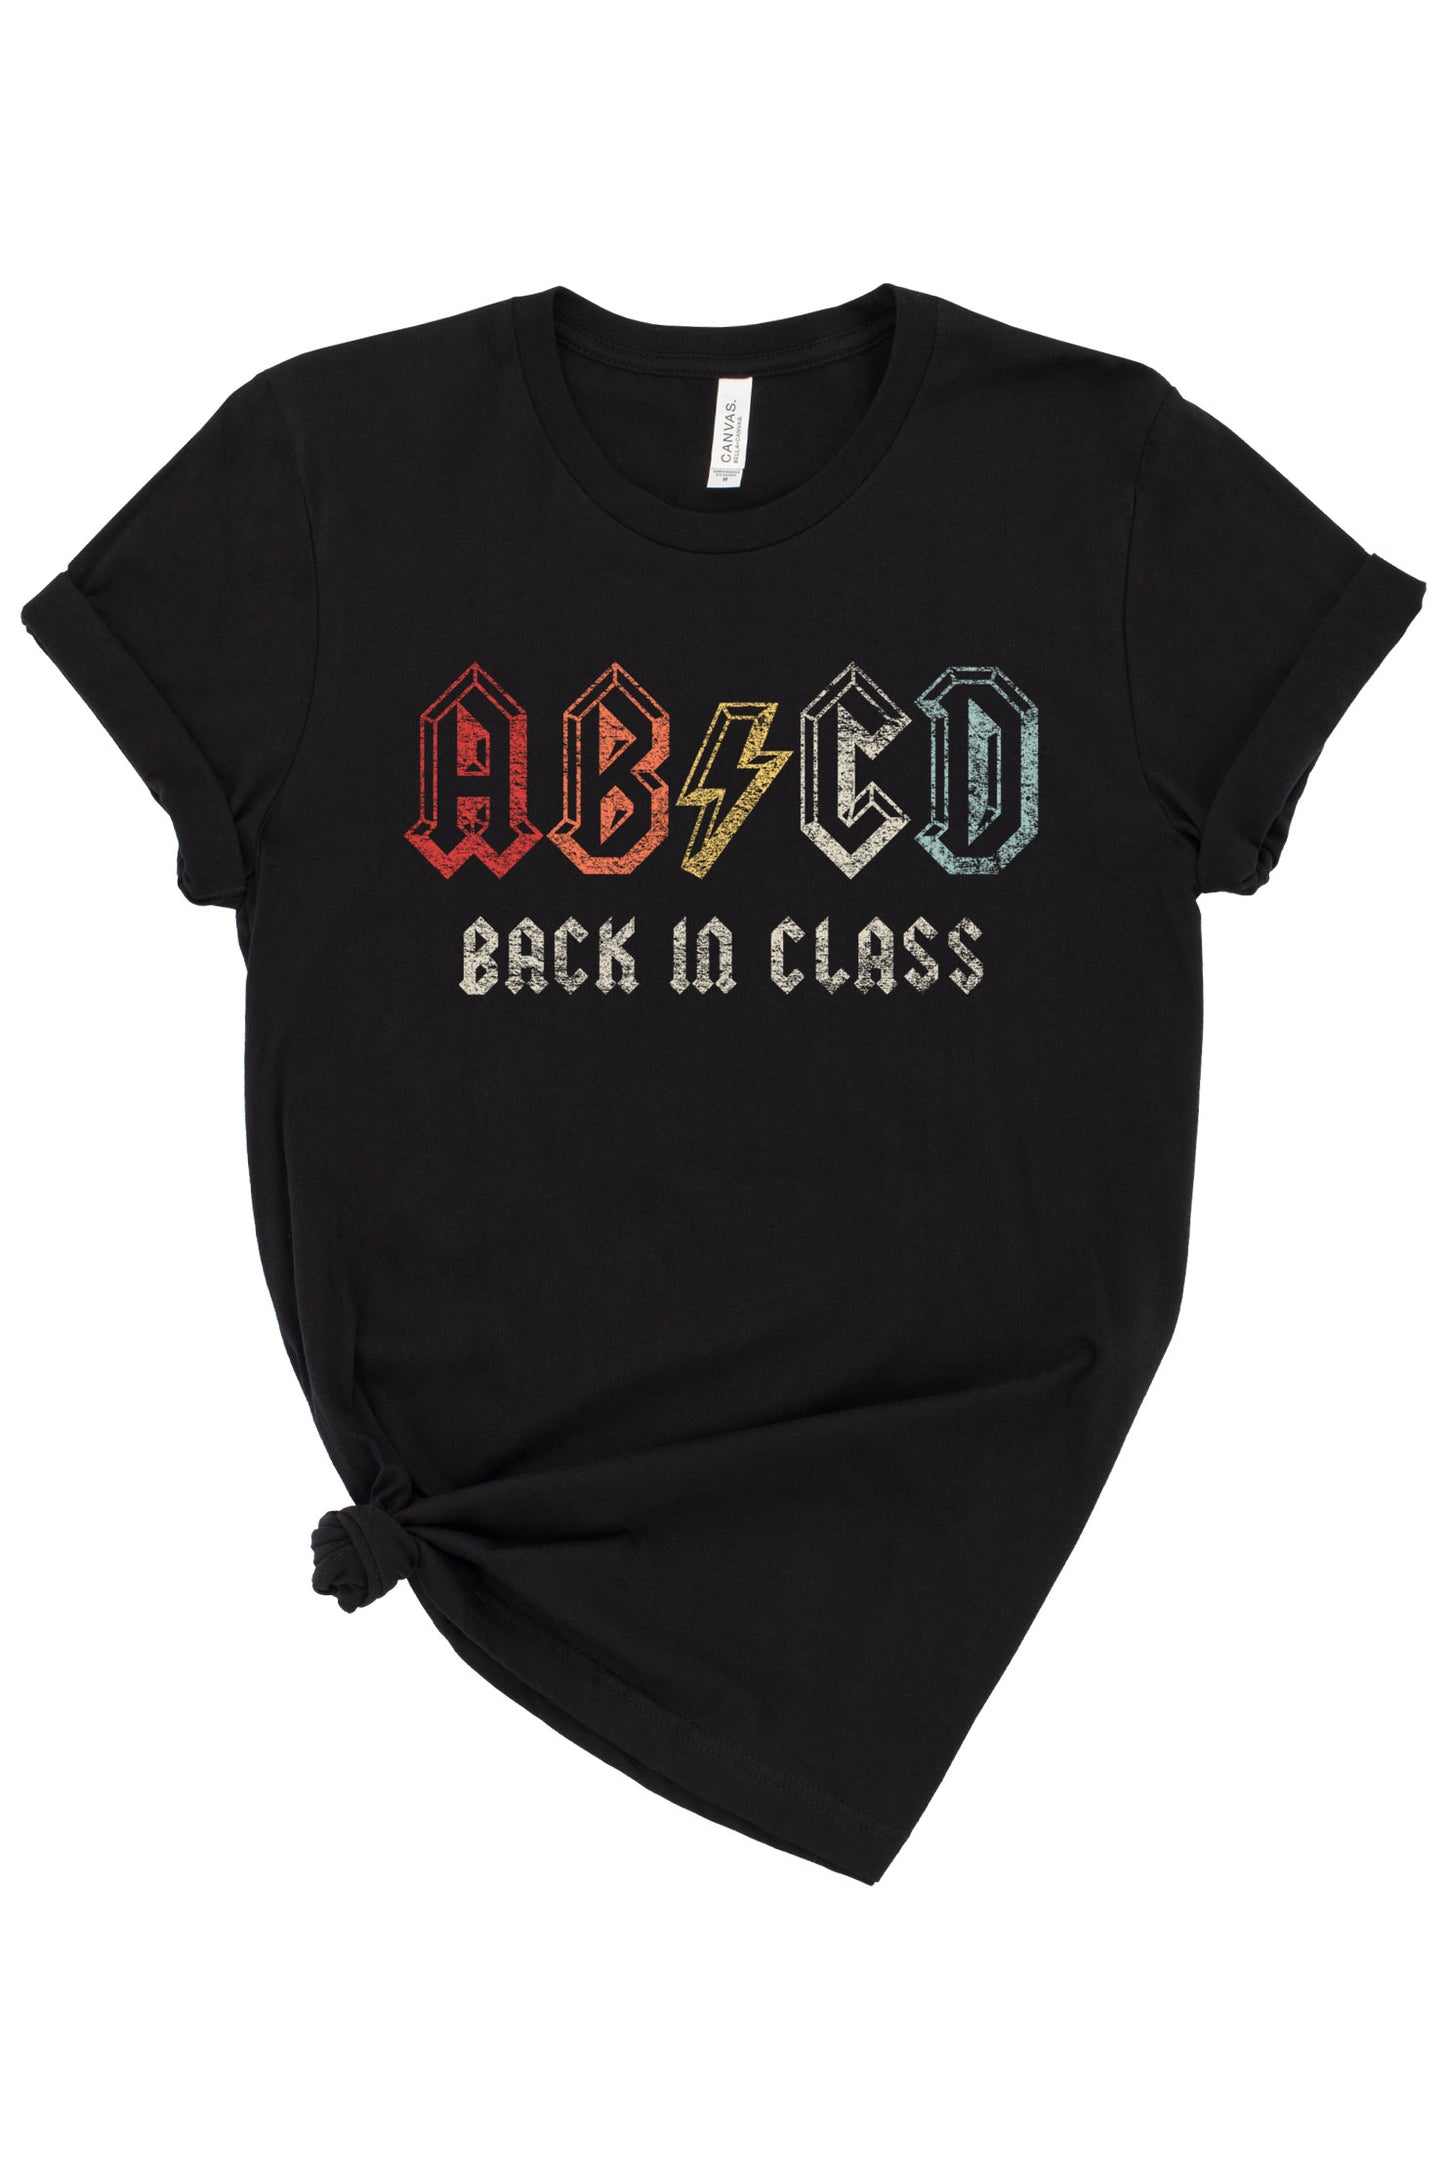 ABCD Back in Class Graphic Tee